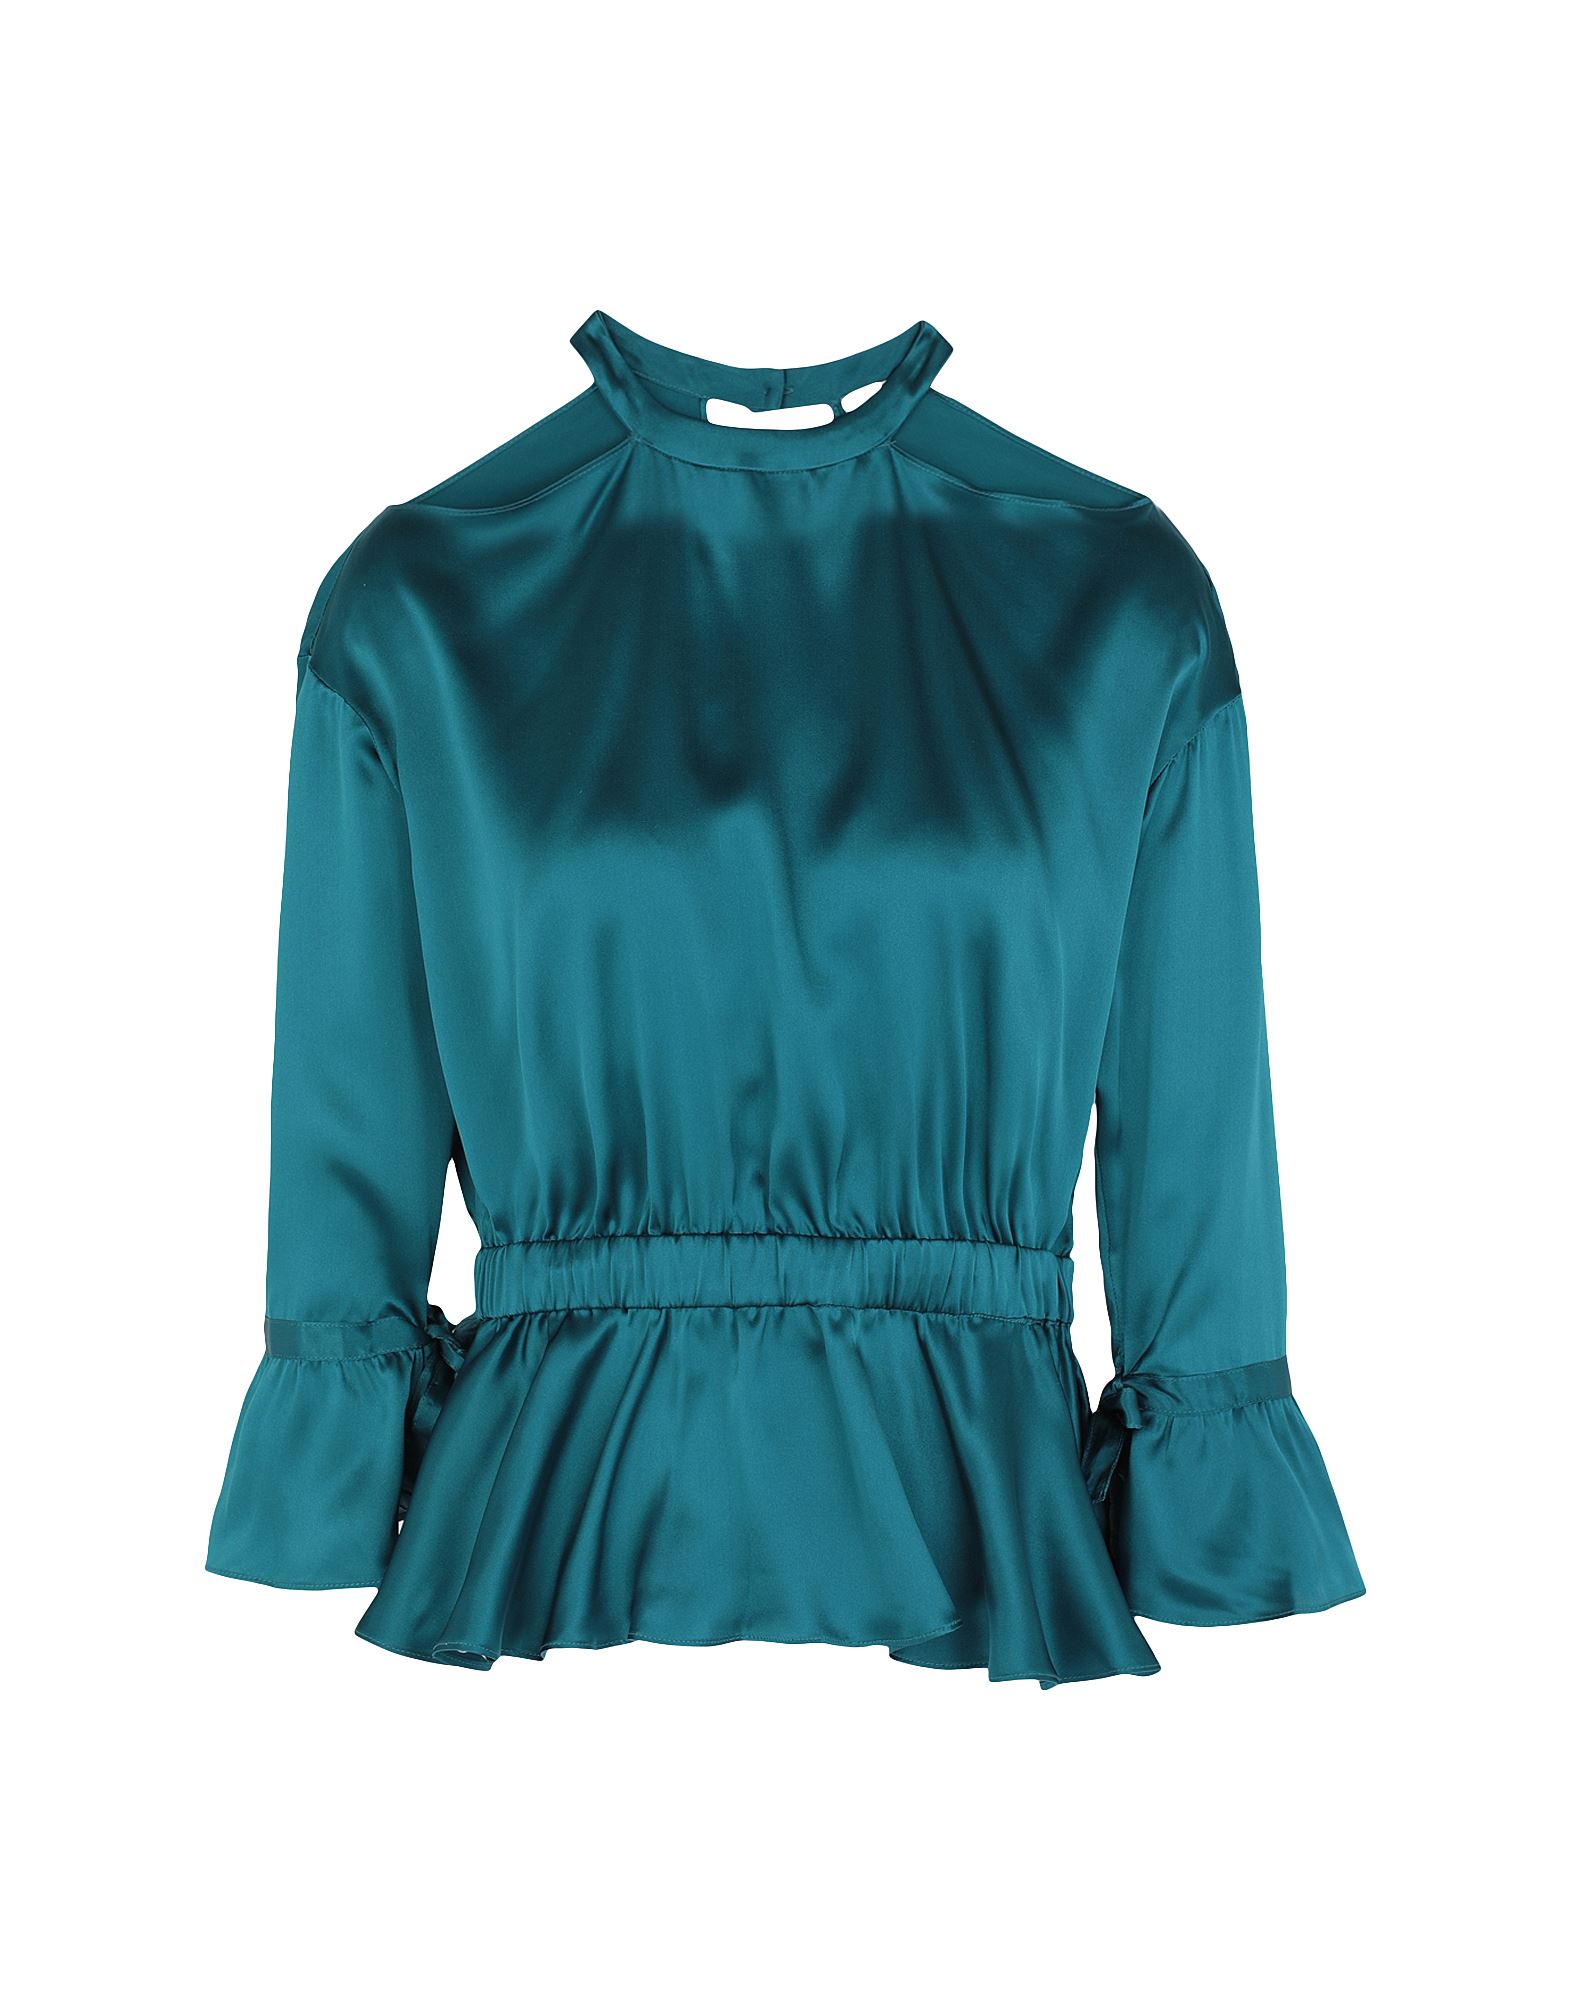 ＜YOOX＞ ★58%OFF！8 by YOOX レディース ブラウス ディープジェード 38 シルク 100% SILK CUT-OUT & STRING DETAIL L/SLEEVE BLOUSE